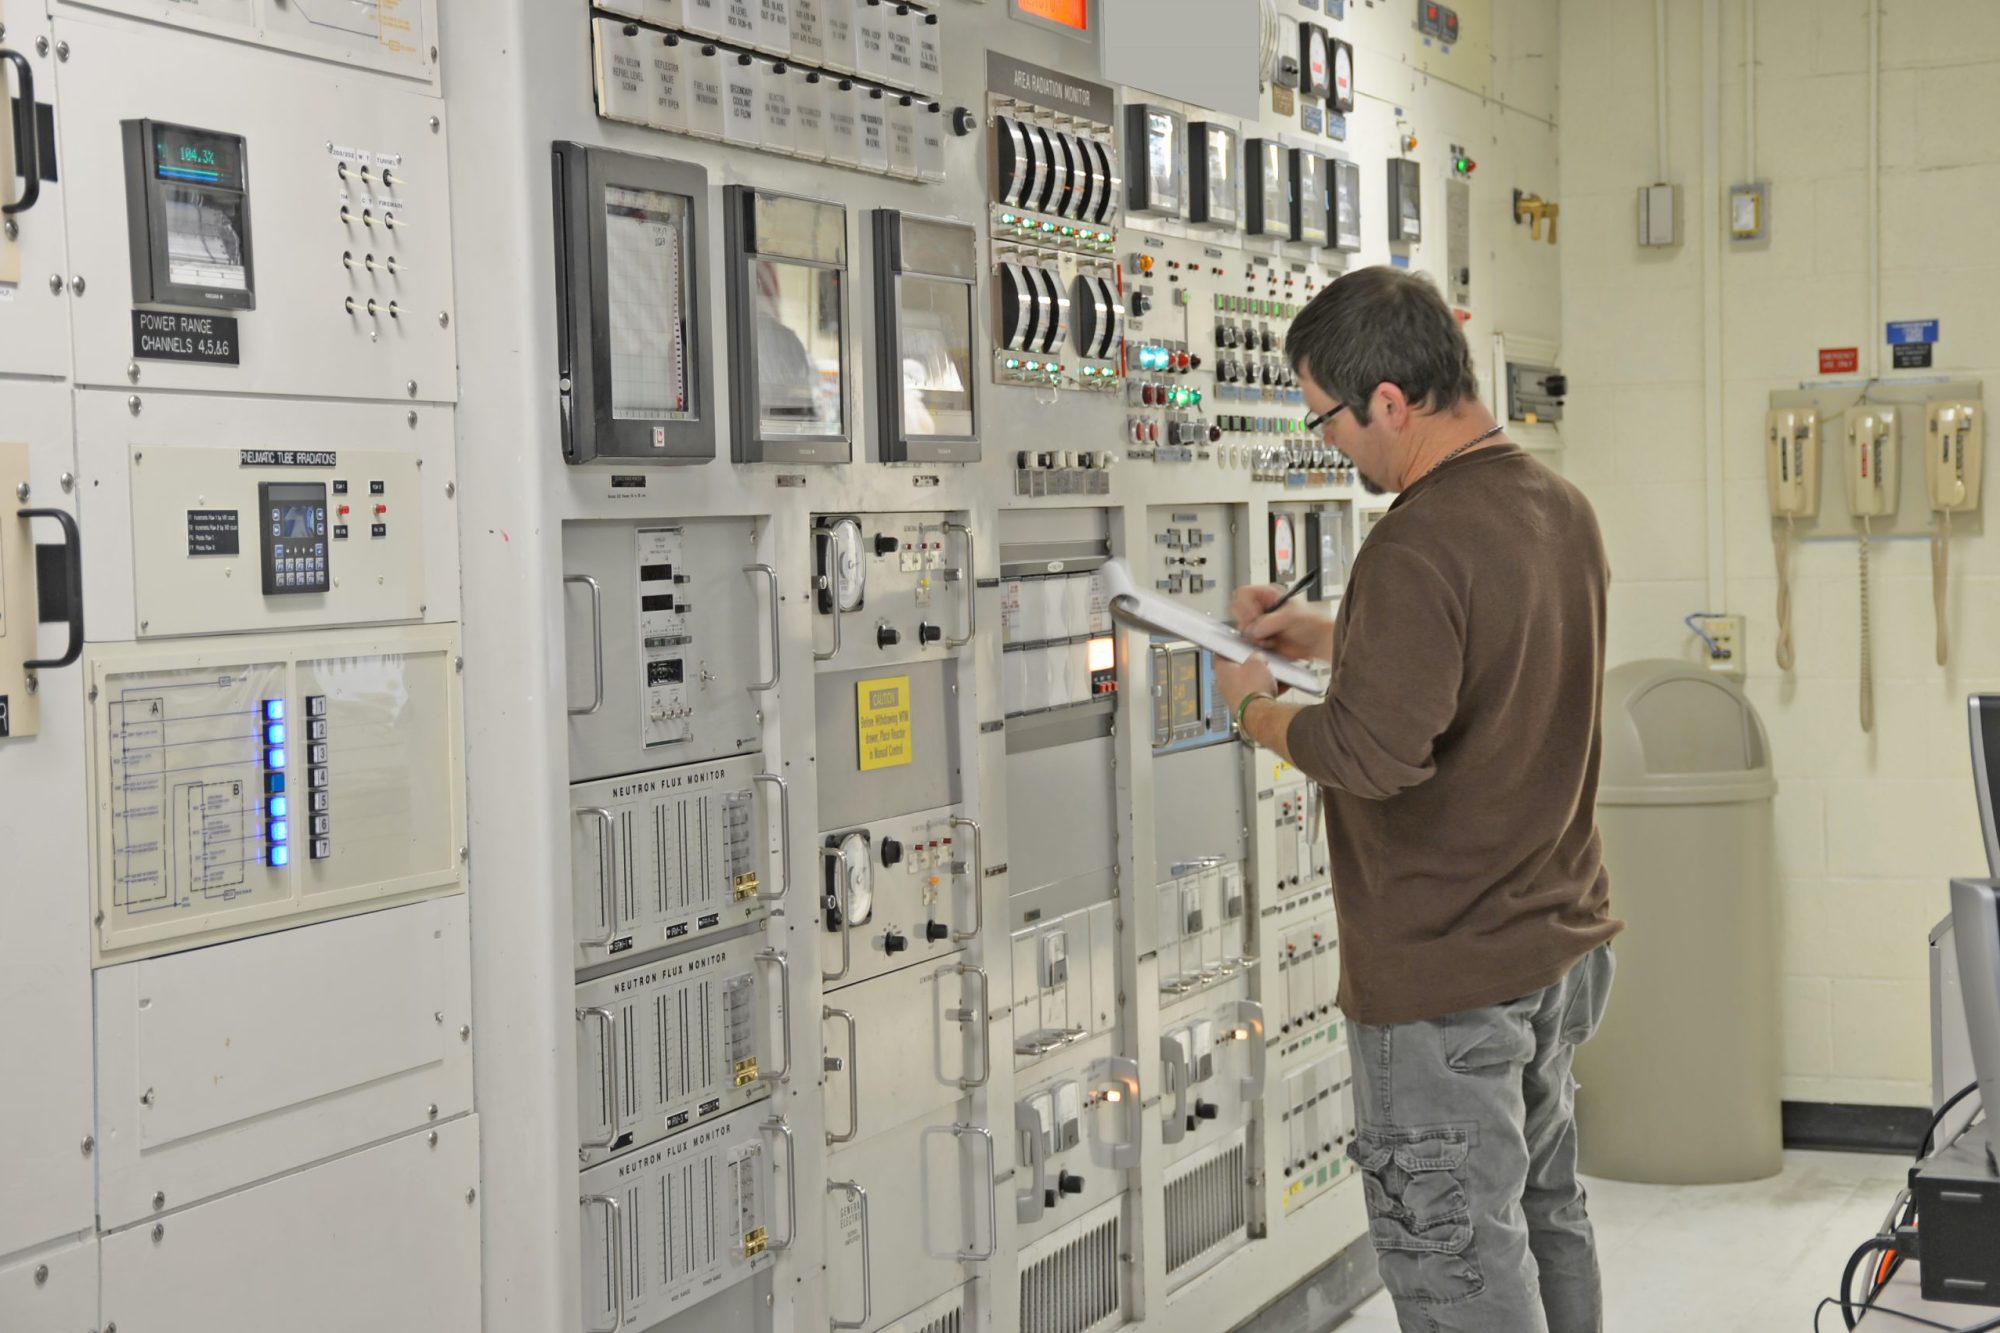 A reactor operator entering log data in the control room